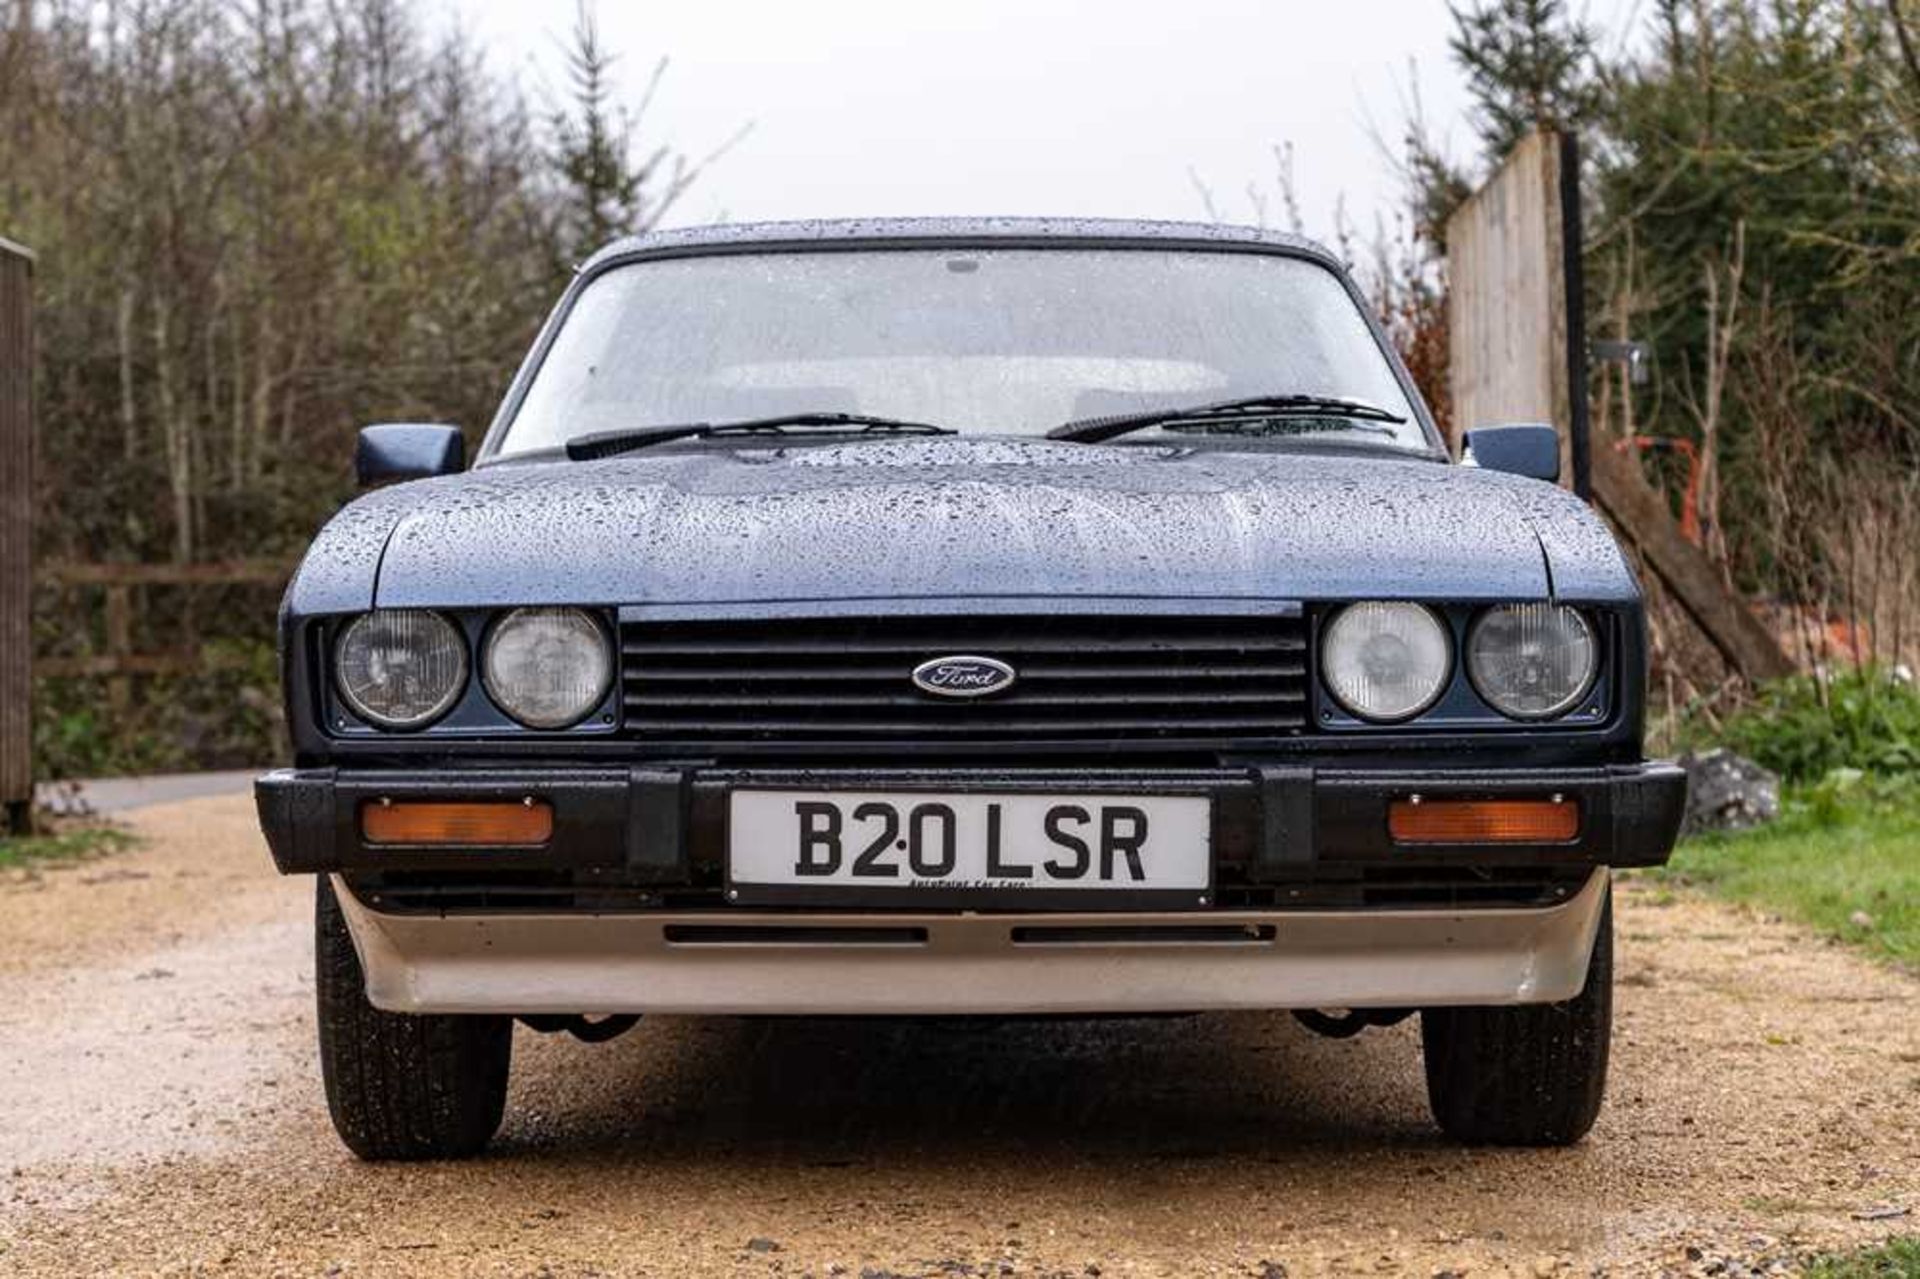 1985 Ford Capri Laser 2.0 Litre Warranted 55,300 miles from new - Image 3 of 67